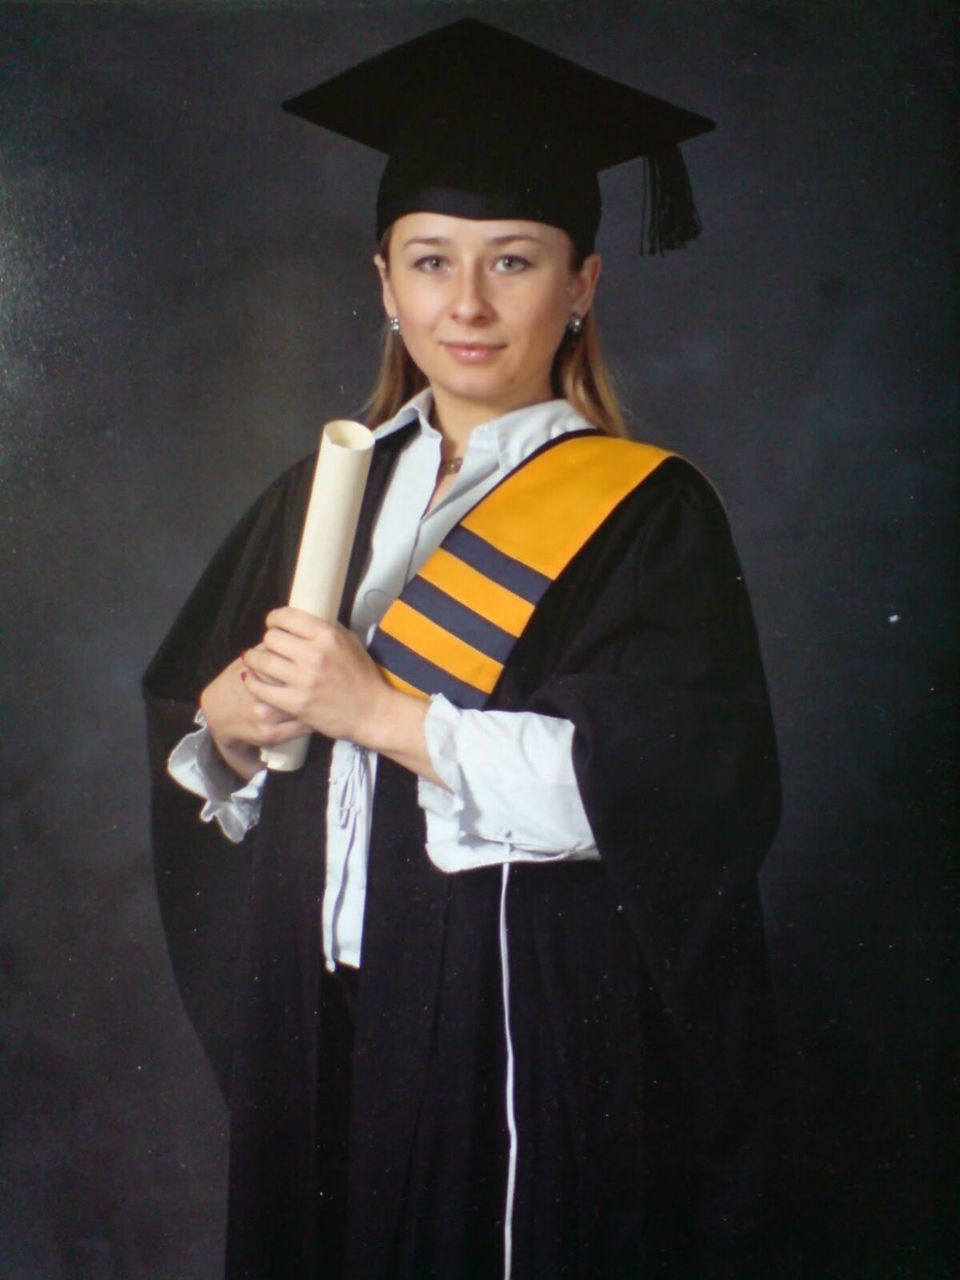 Portrait of woman in graduation gown holding diploma against black background